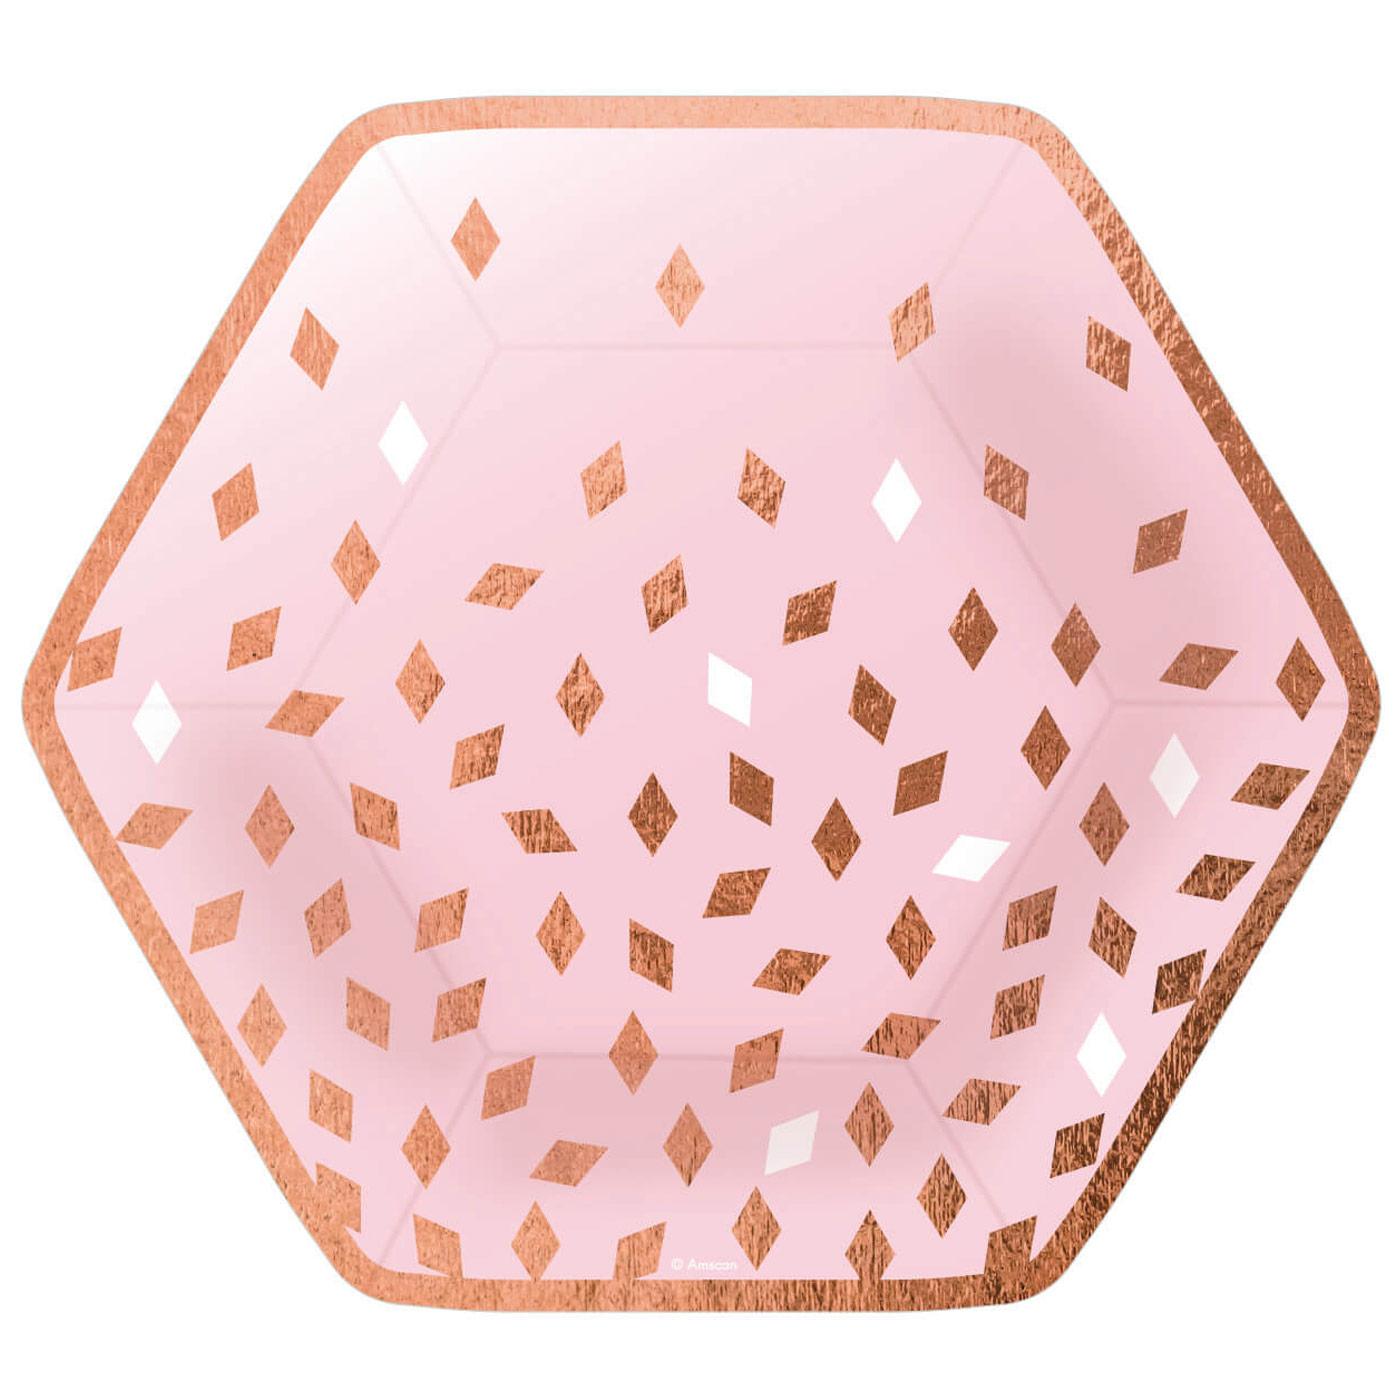 Rose Gold Birthday Hexagonal Paper Plates 9in, 8pcs Printed Tableware - Party Centre